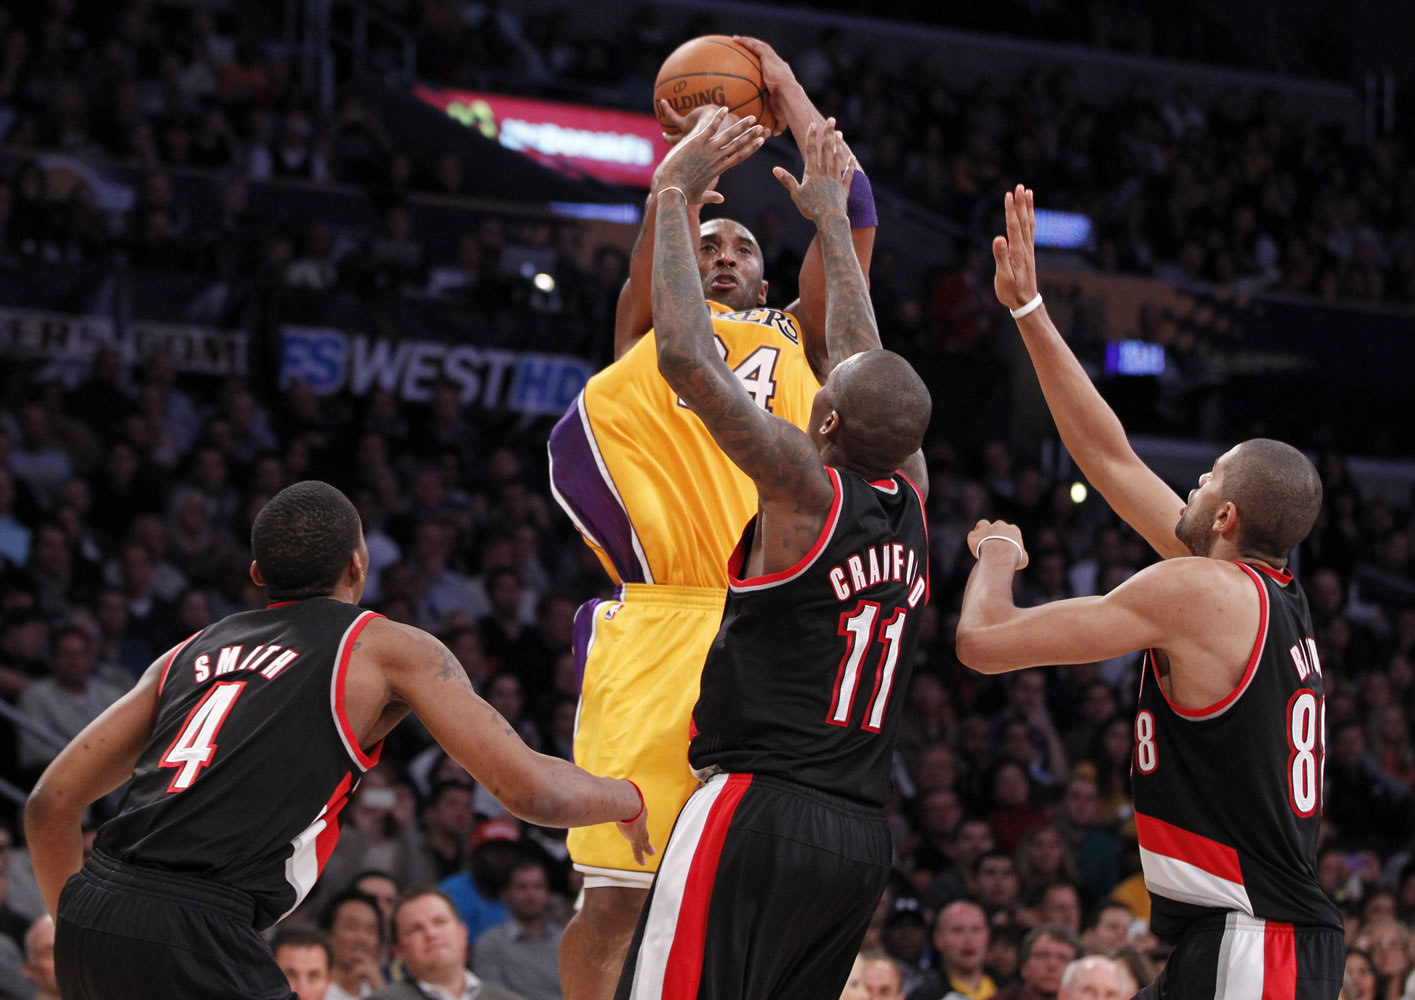 Los Angeles Lakers' Kobe Bryant shoots over Portland Trail Blazers', from left to right, Nolan Smith, Jamal Crawford, and Nicolas Batum during the second half Friday.